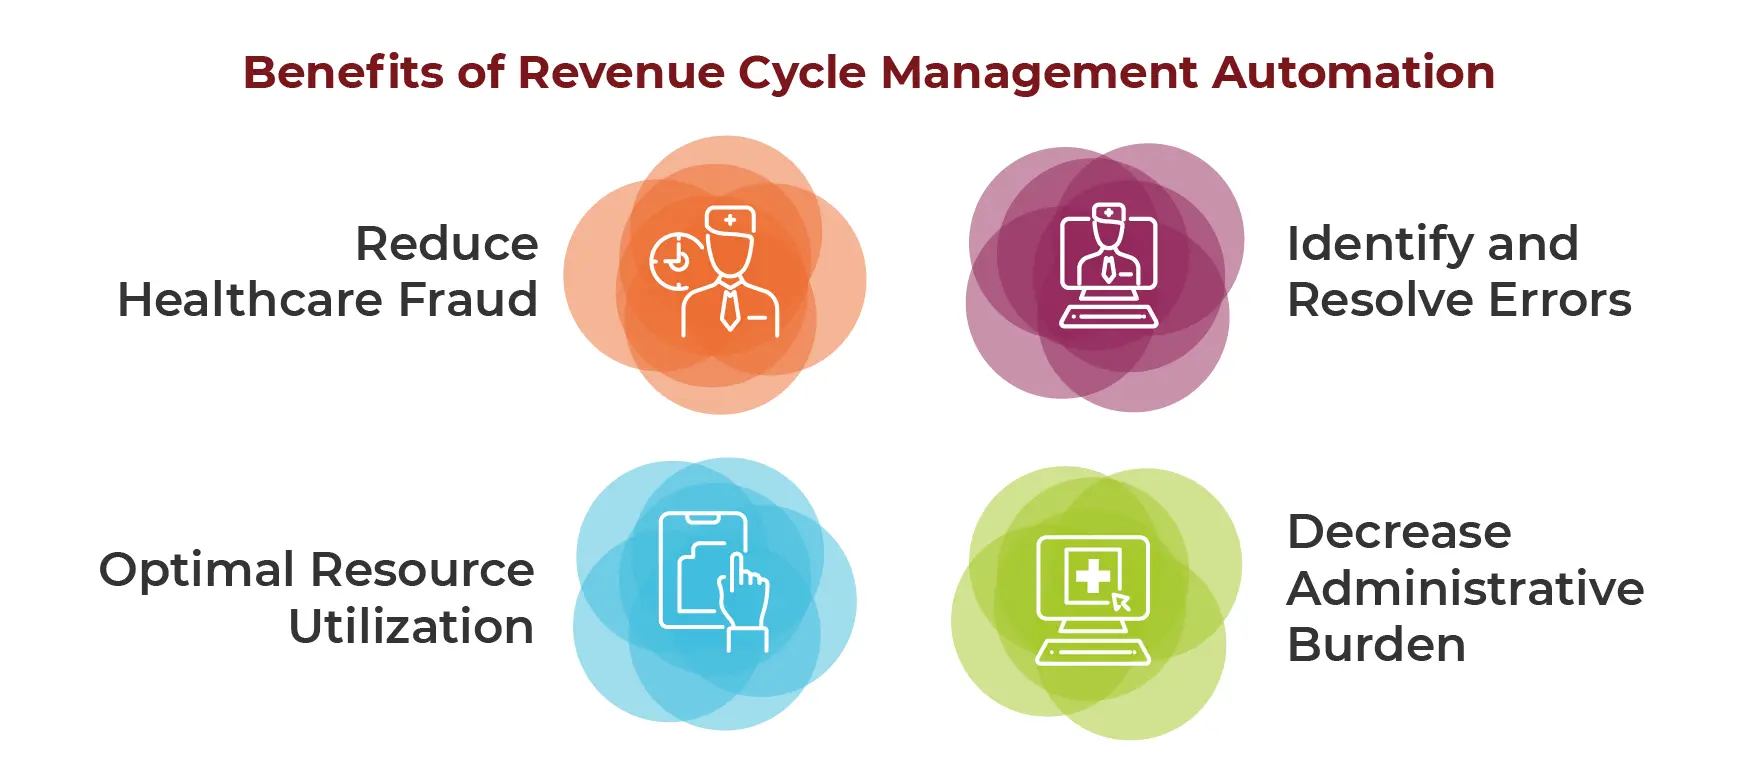 Benefits of Revenue Cycle Management Automation